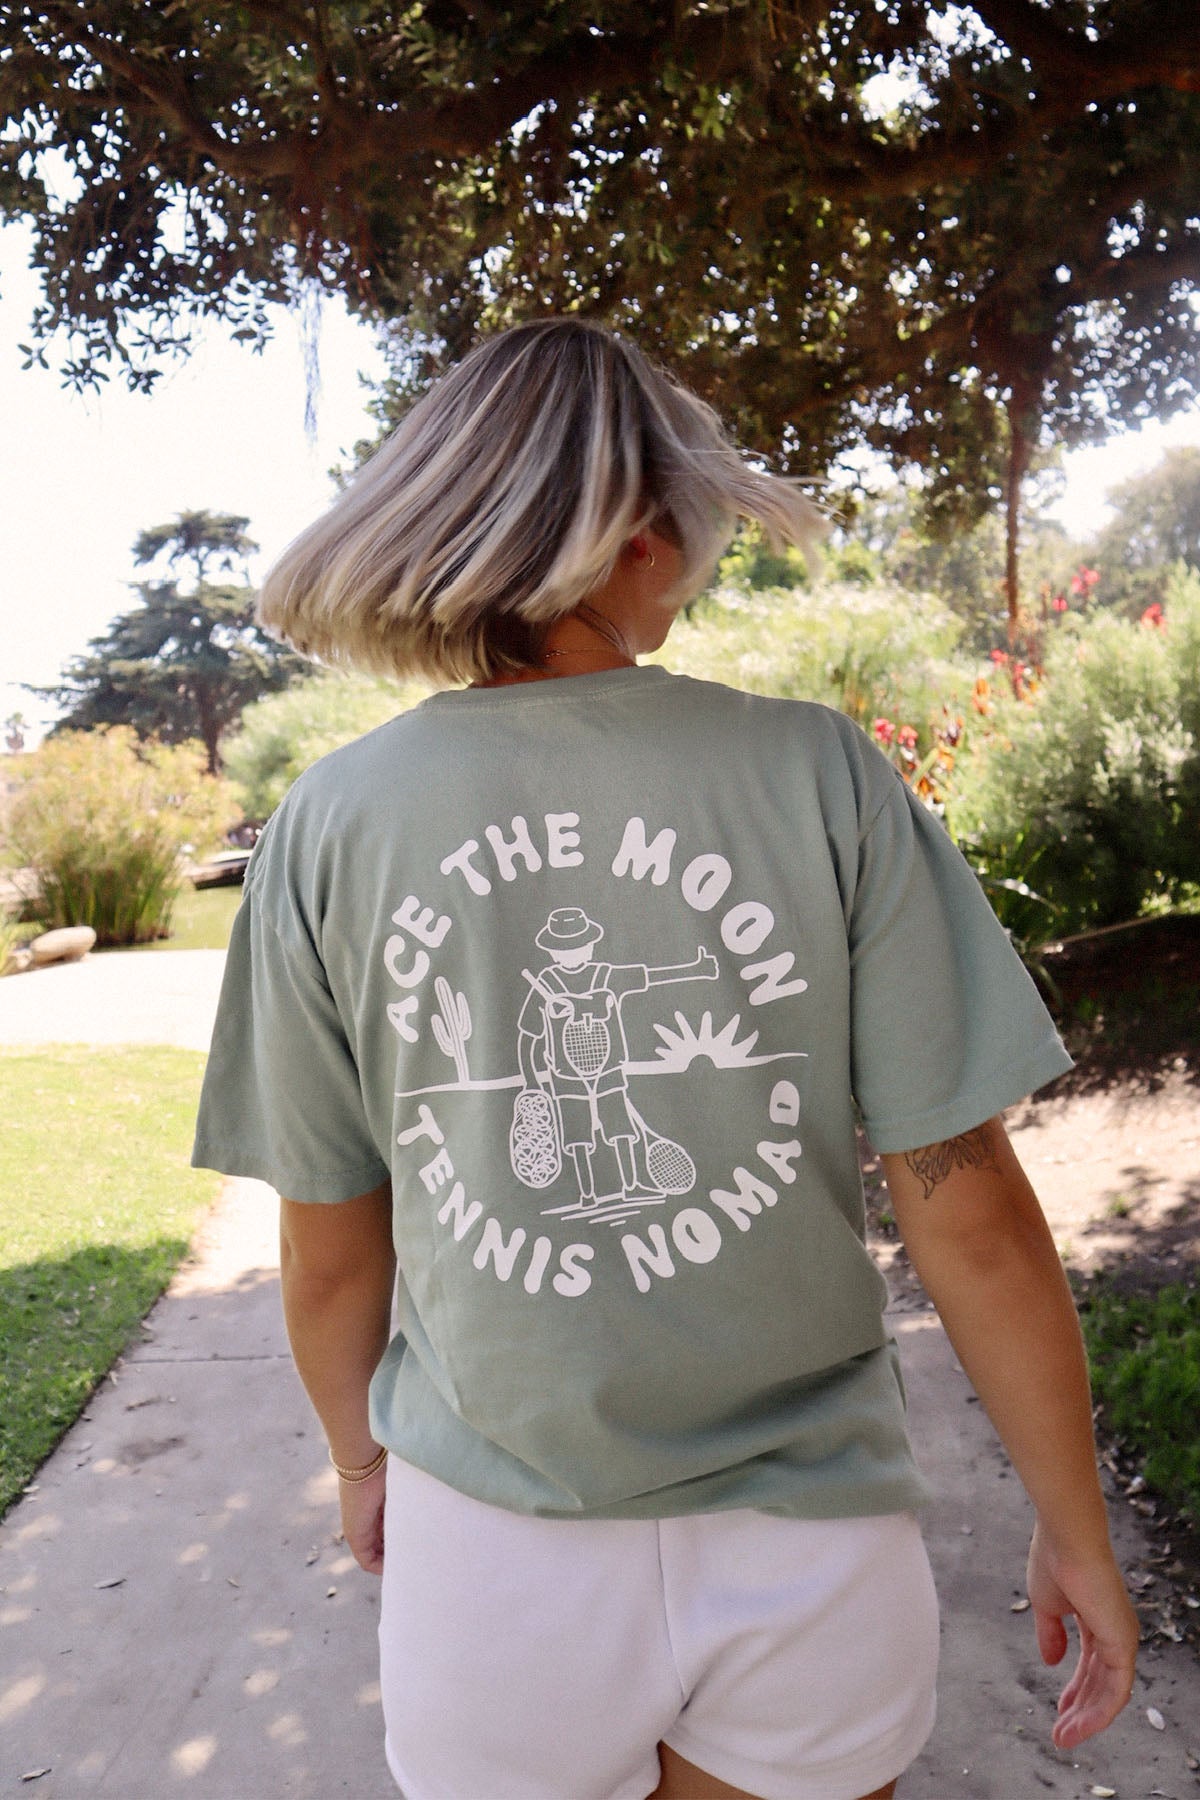 Tennis Nomad Tees in Green or White